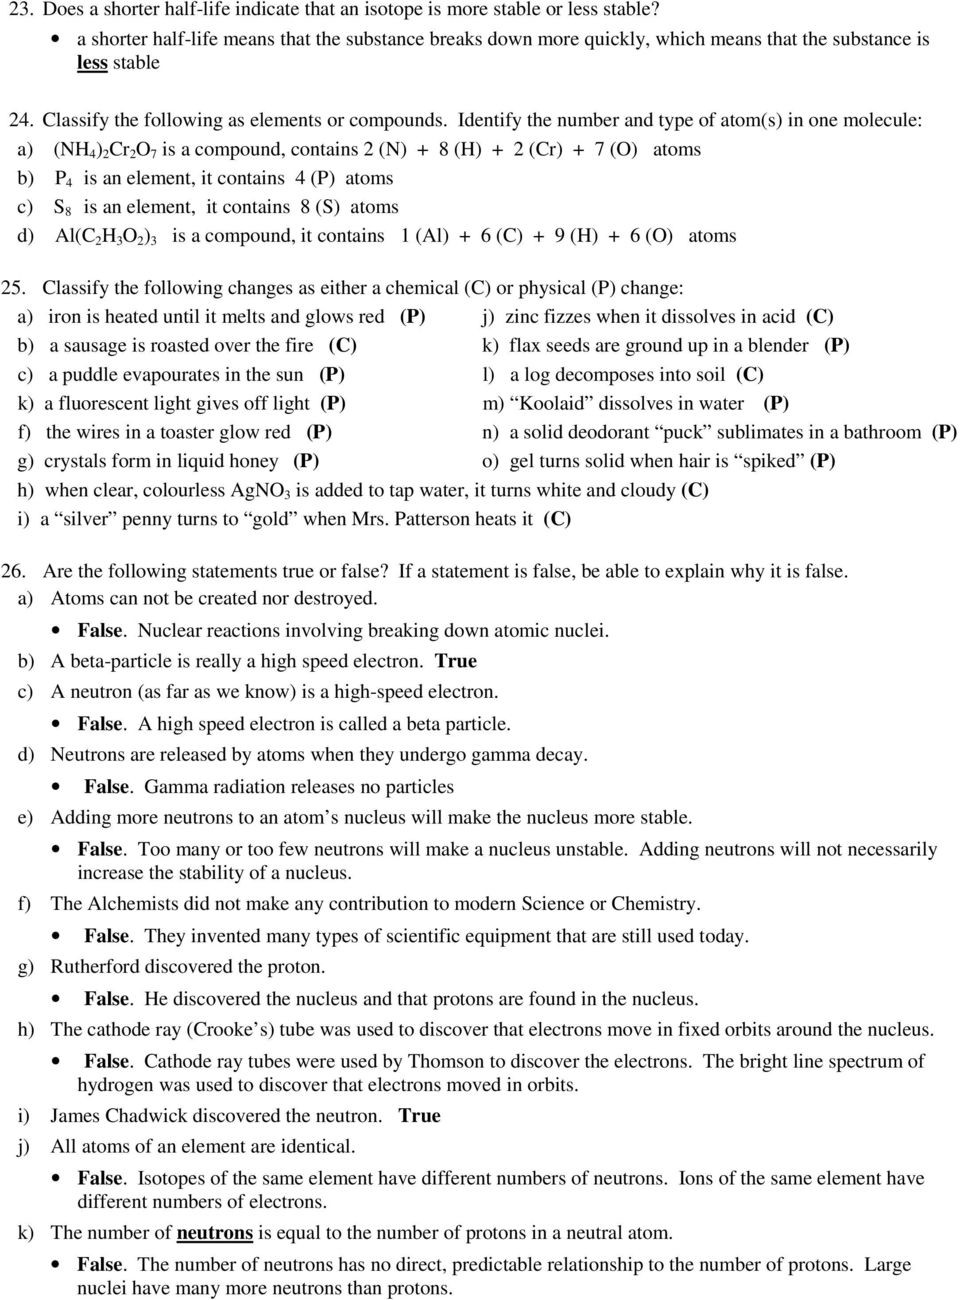 Atomic theory Worksheet Answers Answers to Review Questions for atomic theory Quiz 1 Pdf